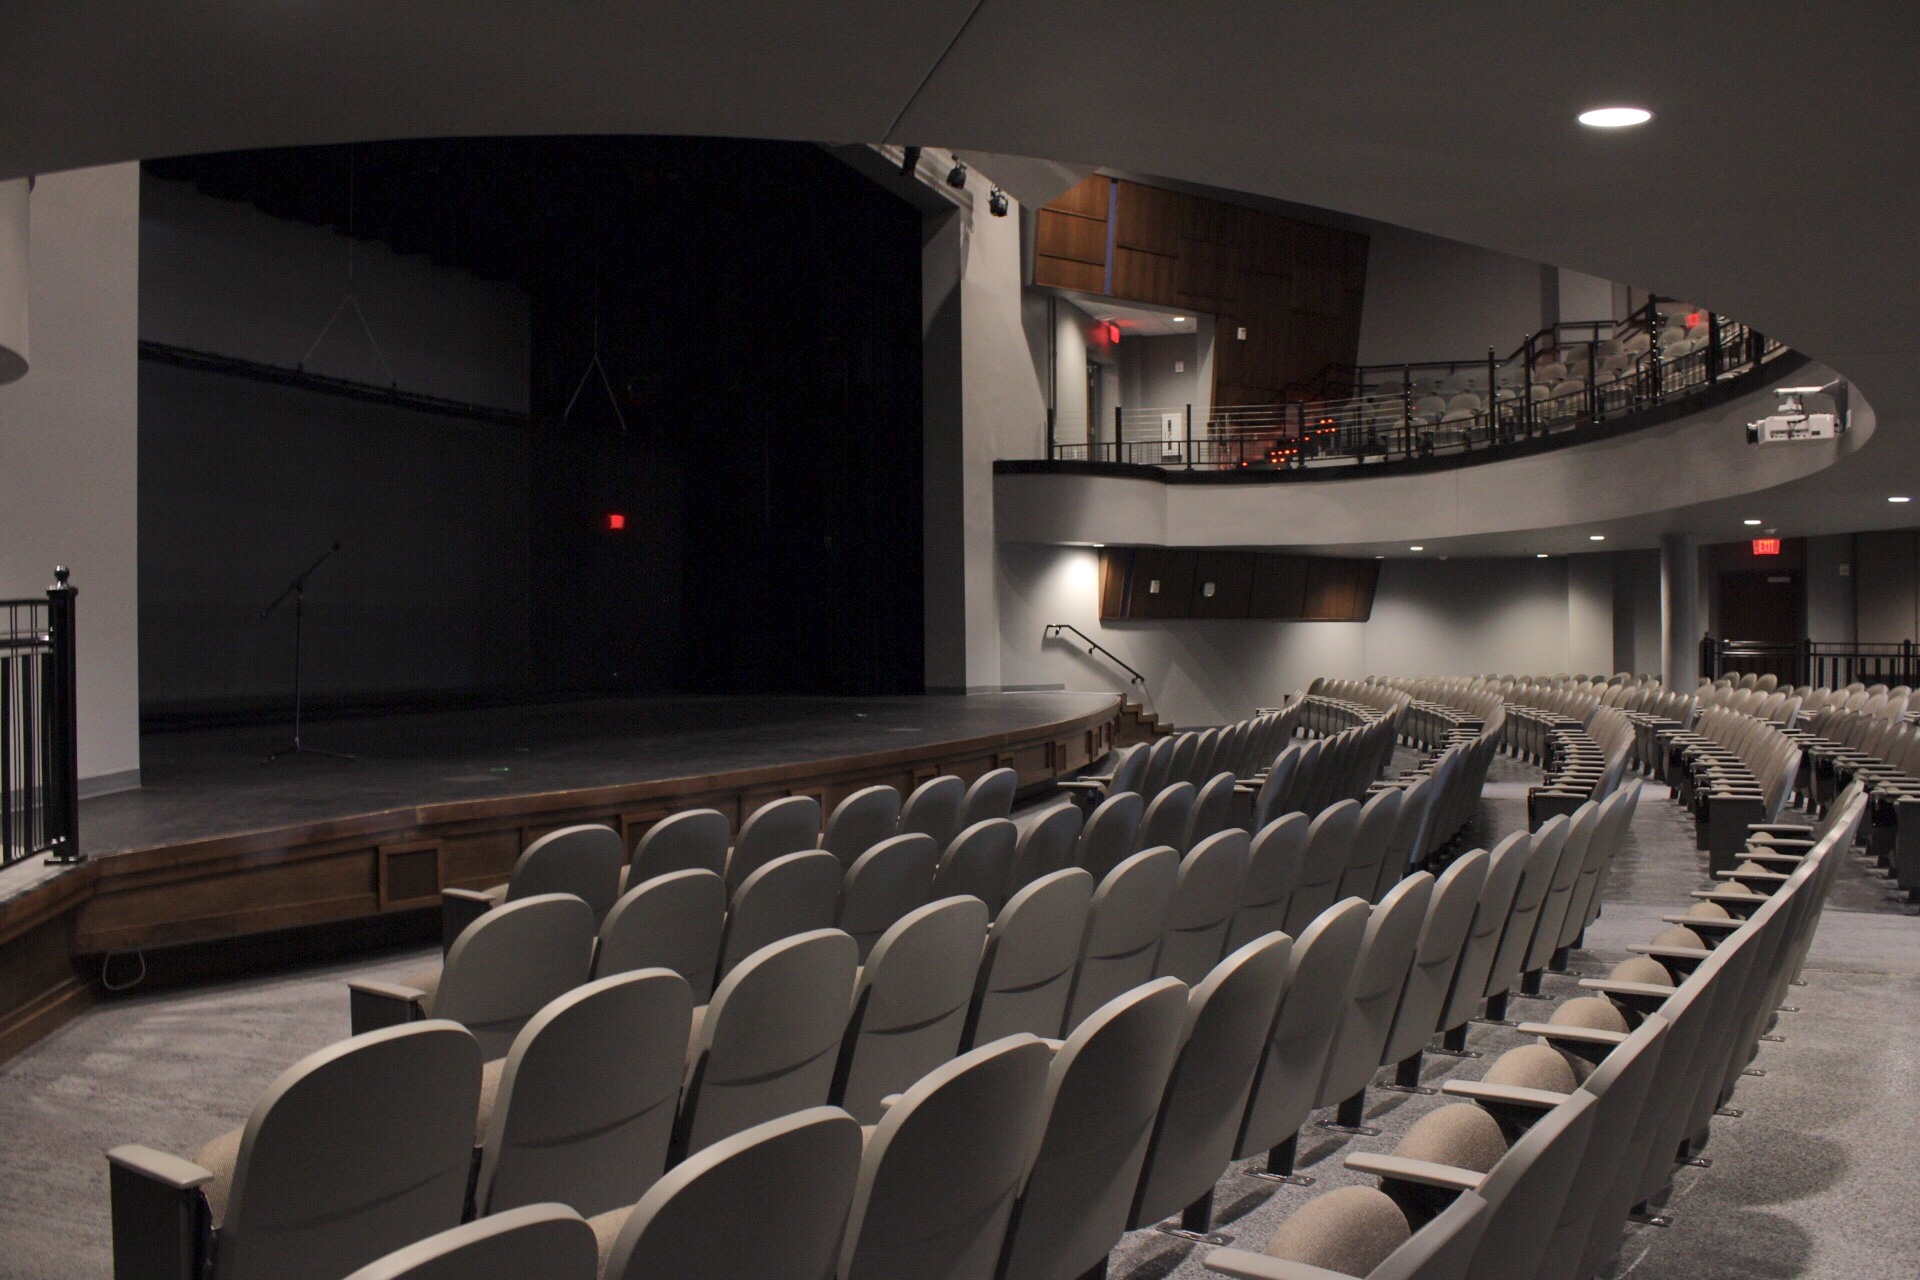 Auditorium seats, balcony and stage